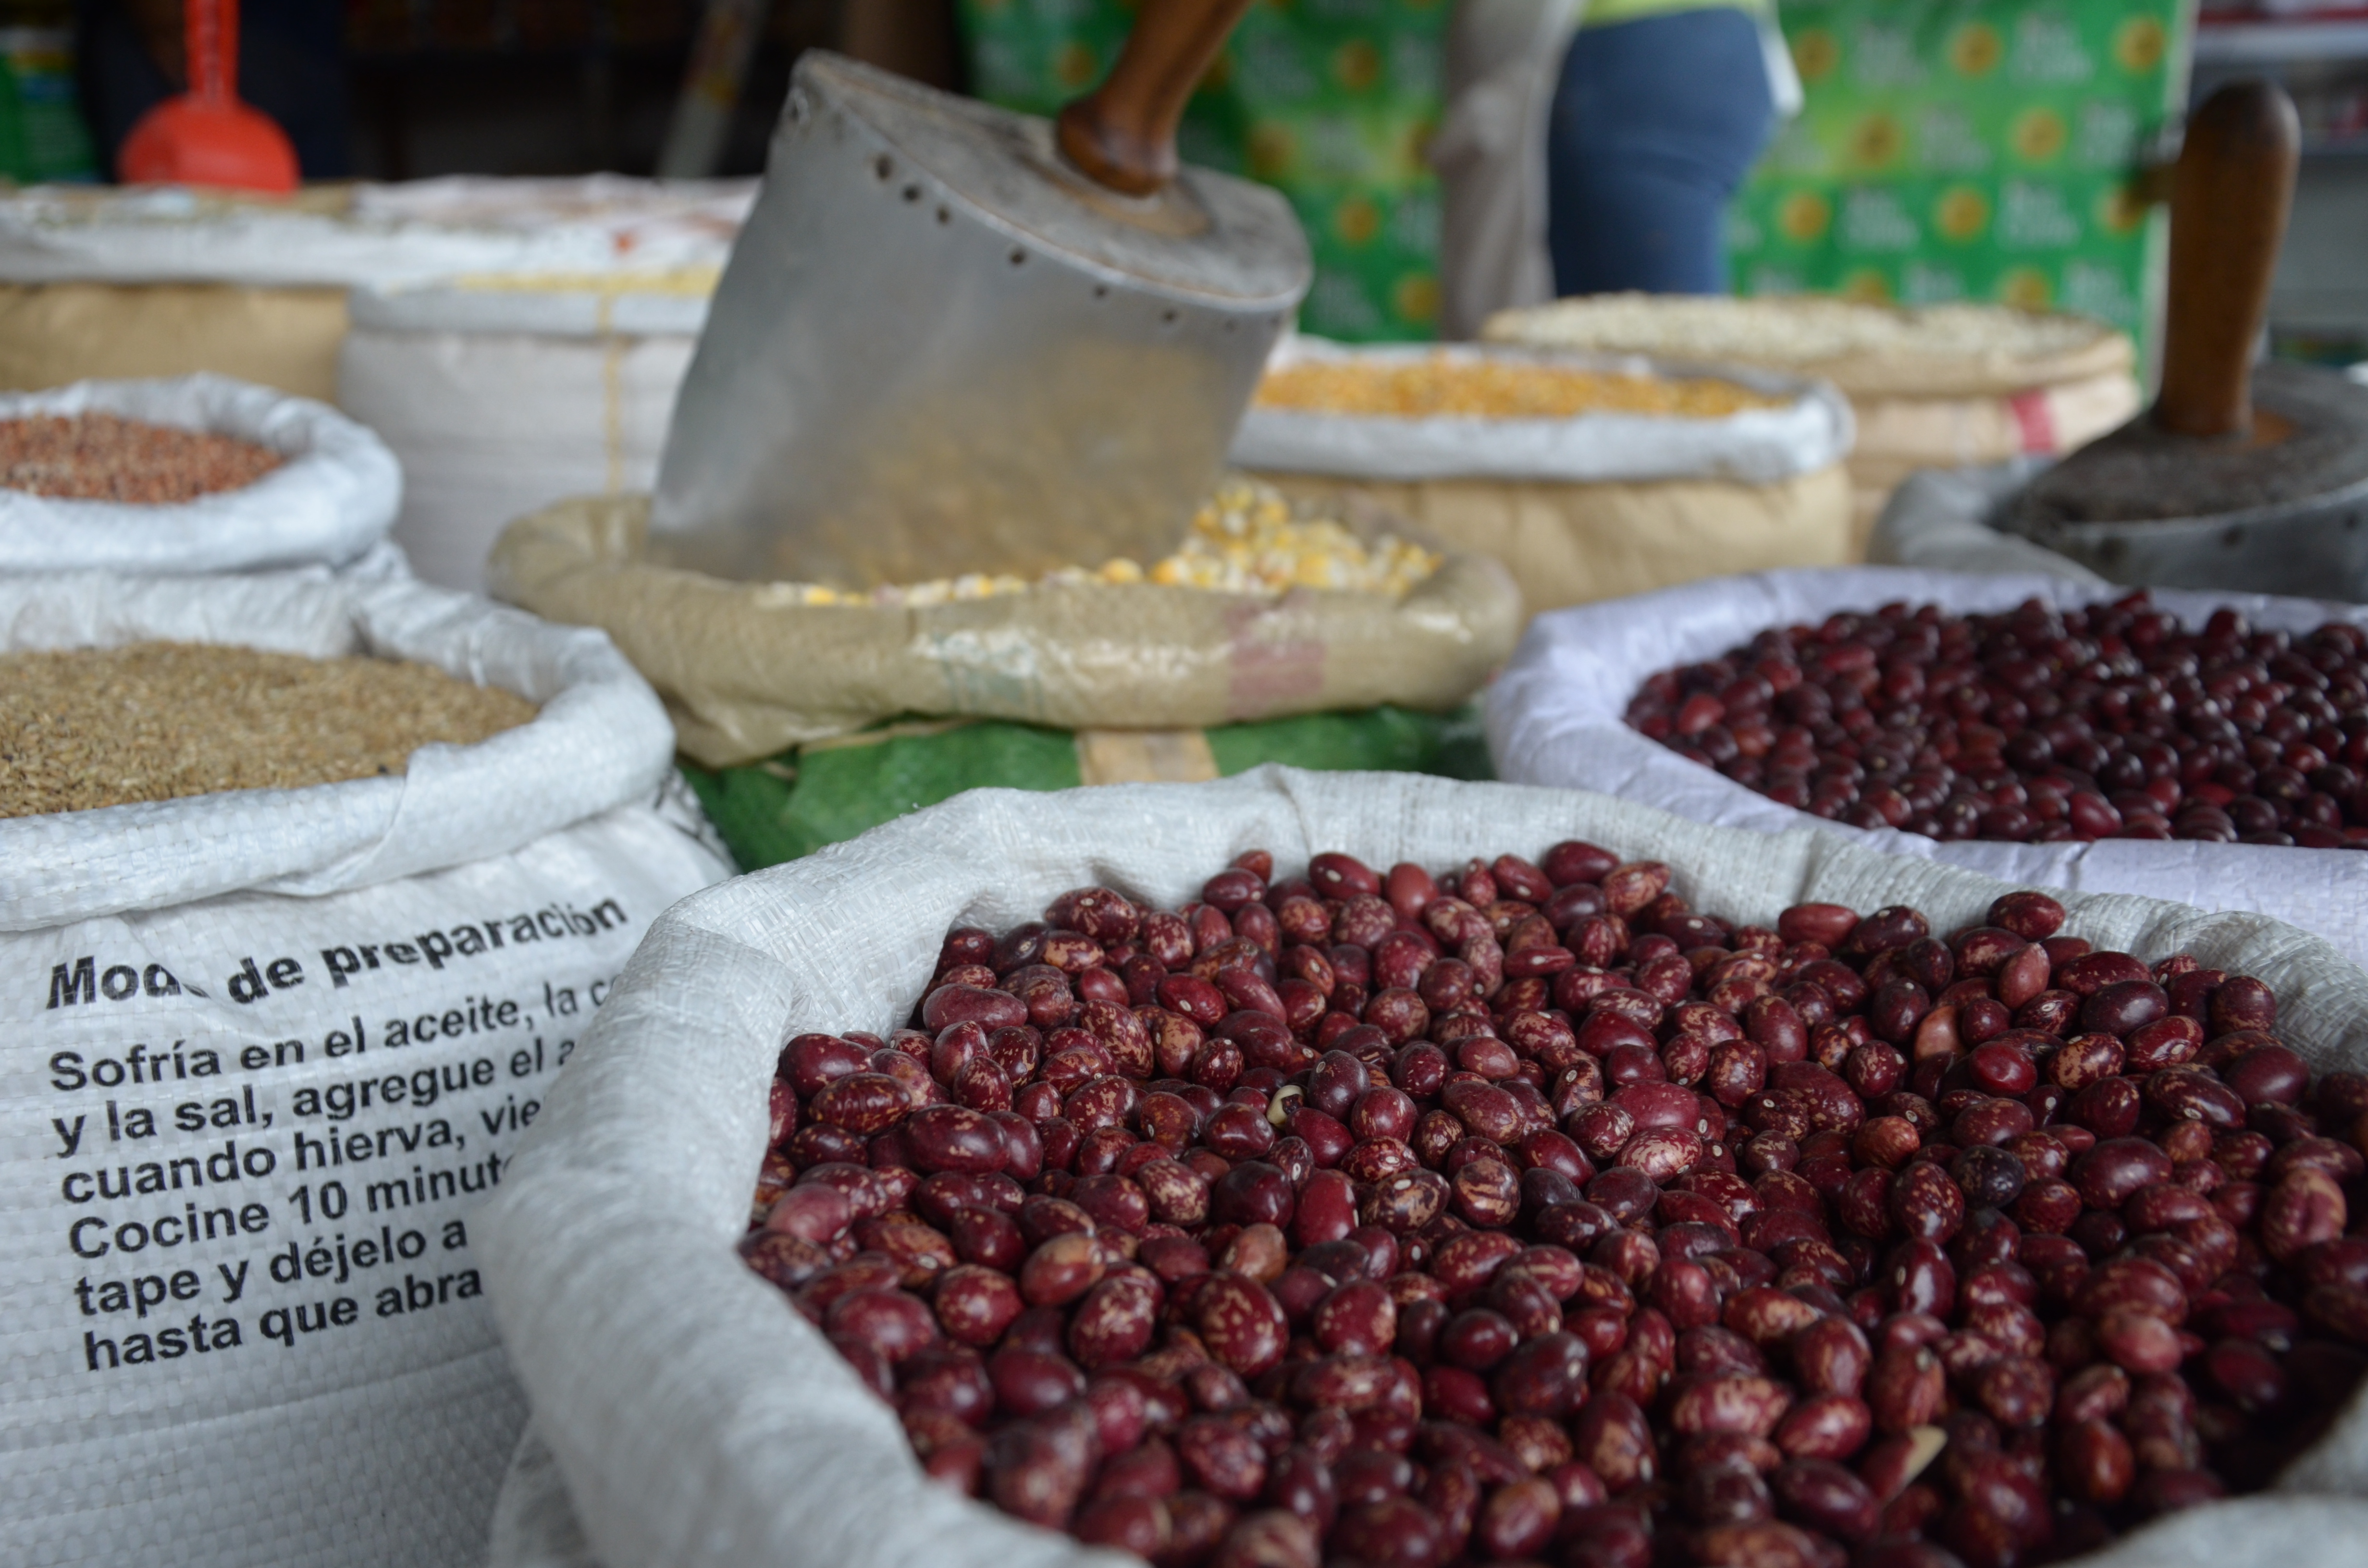 Beans - an important staple food in Colombia - and other products for sales in Alameda Market, Cali, Colombia. Photo by: Melissa Reichwage/CIAT.